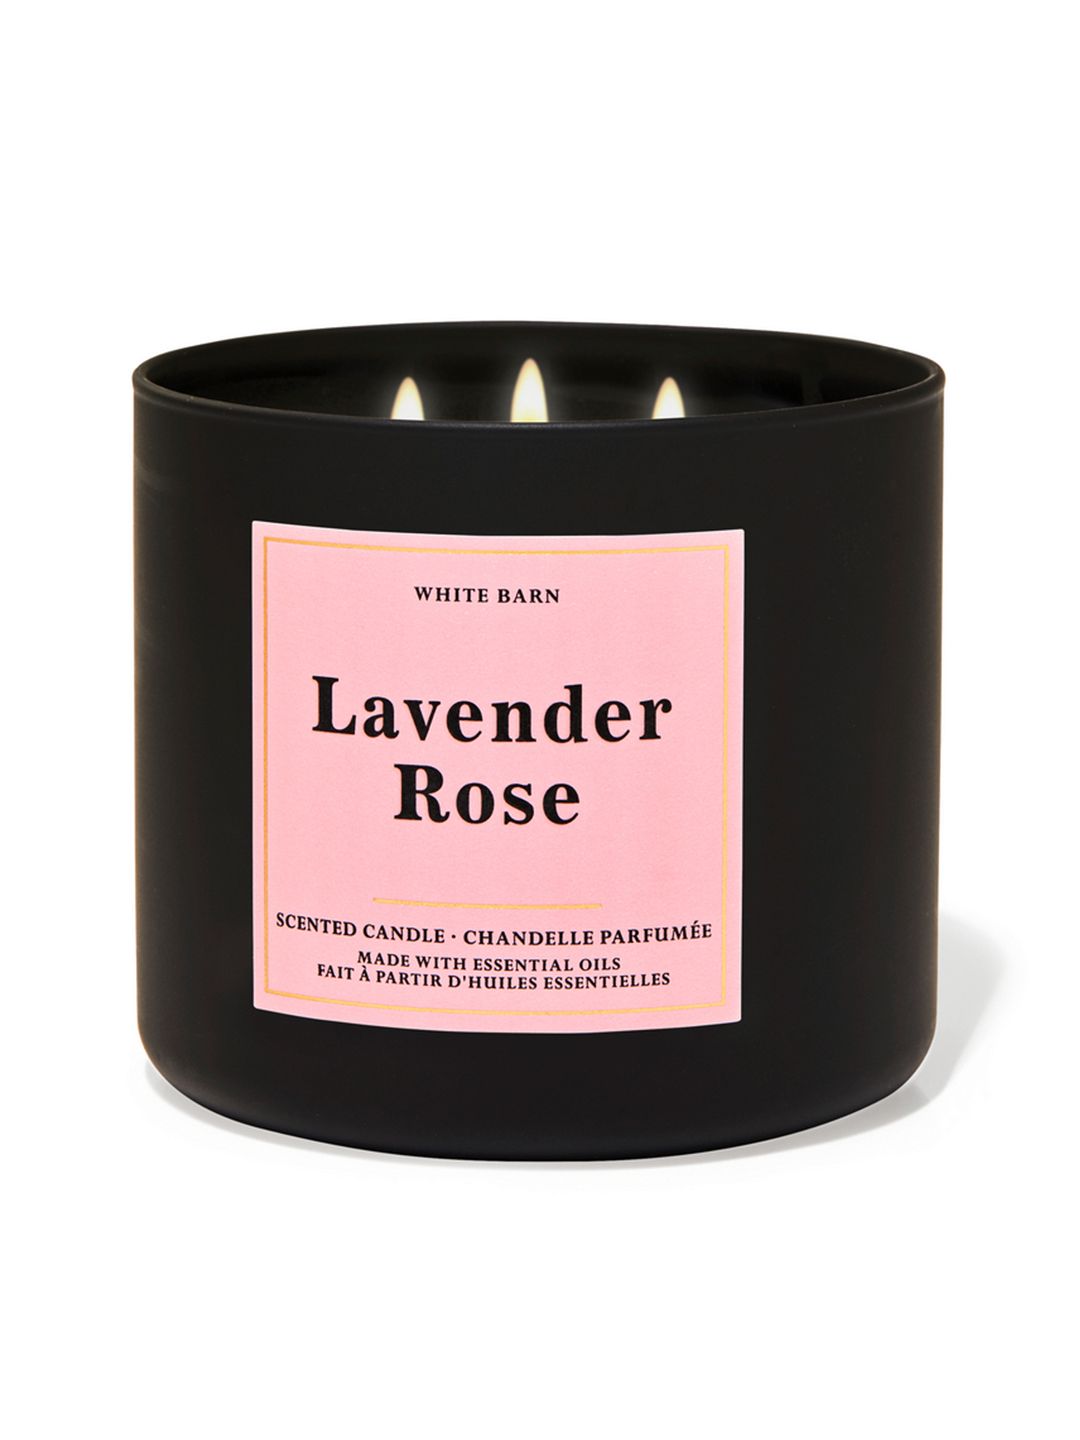 Bath & Body Works White Barn Lavender Rose 3-Wick Scented Candle - 411 g Price in India